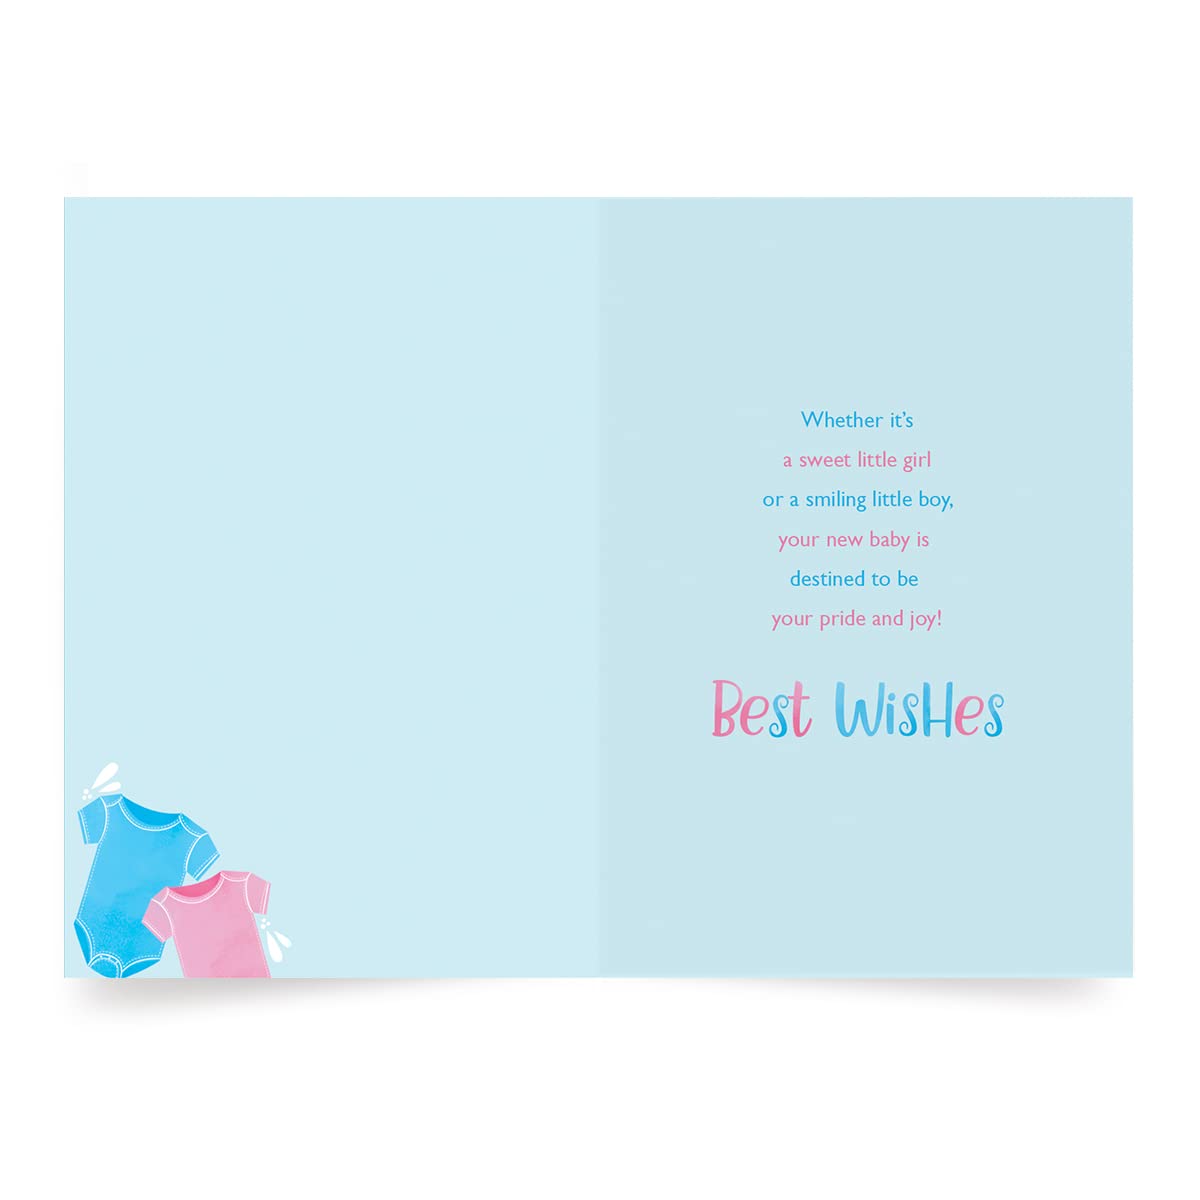 Designer Greetings Baby Gender Reveal Cards – Cute Pink and Blue Baby Accessory Design (6 Cards with Envelopes)